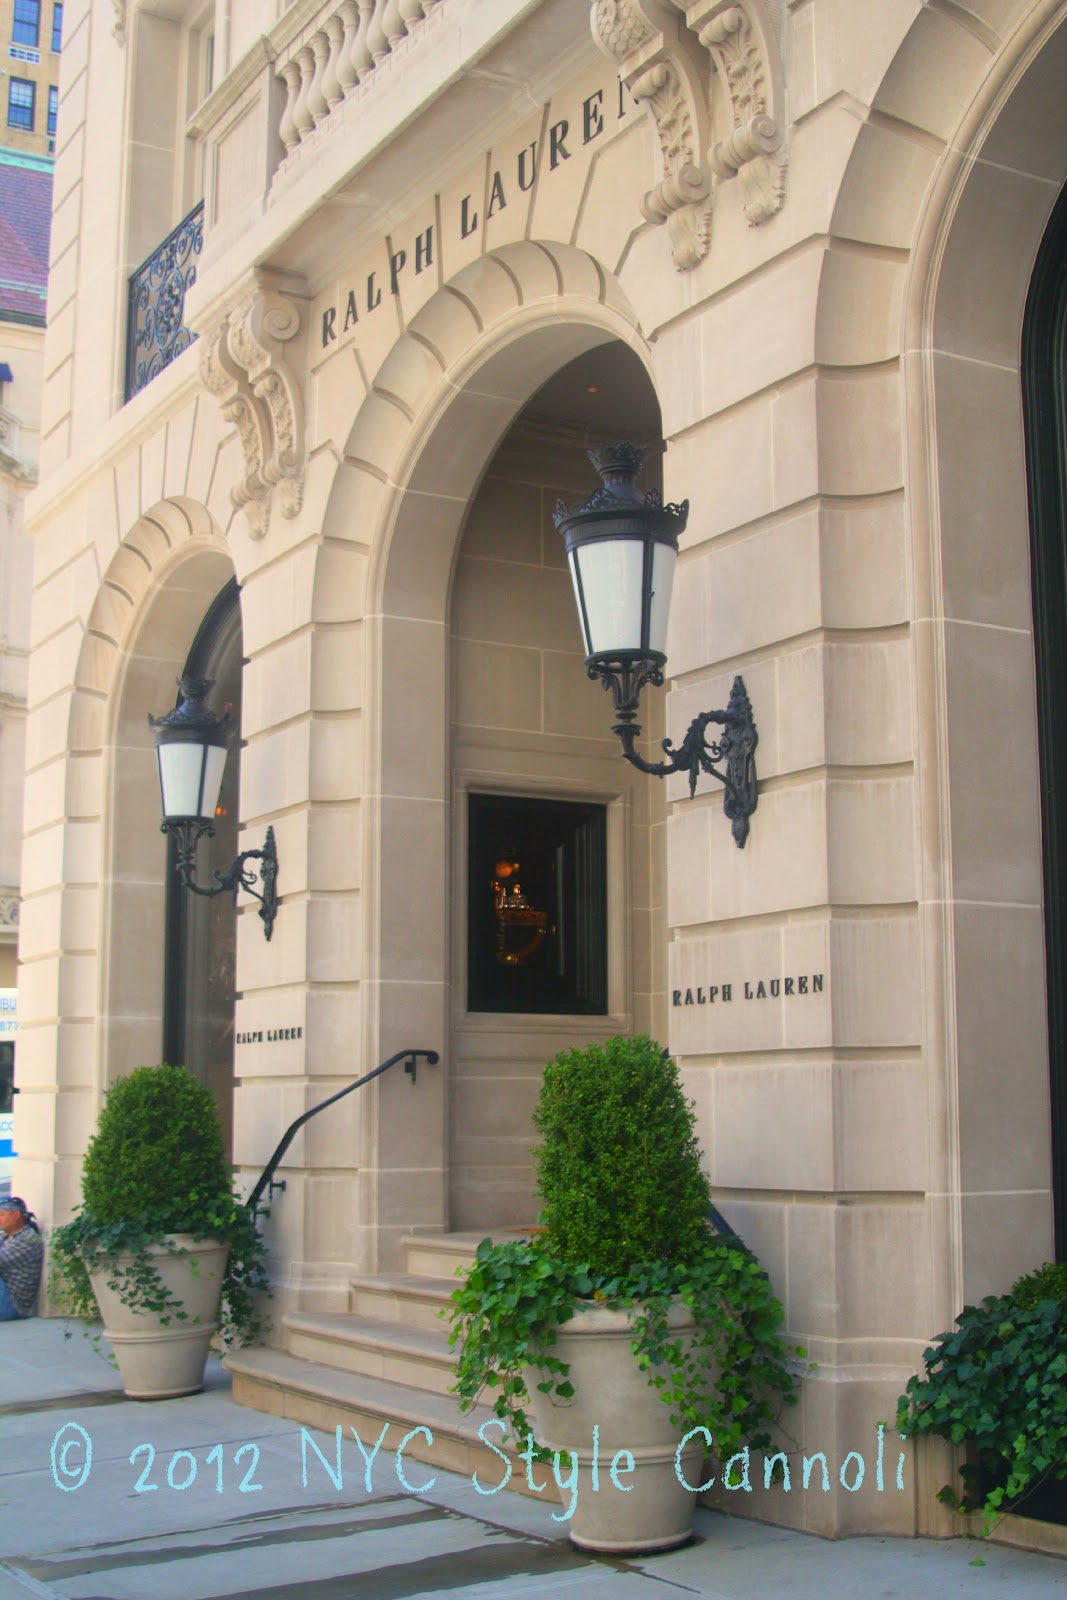 NYC, Style & a little Cannoli: Ralph Lauren Shopping Upper East Side